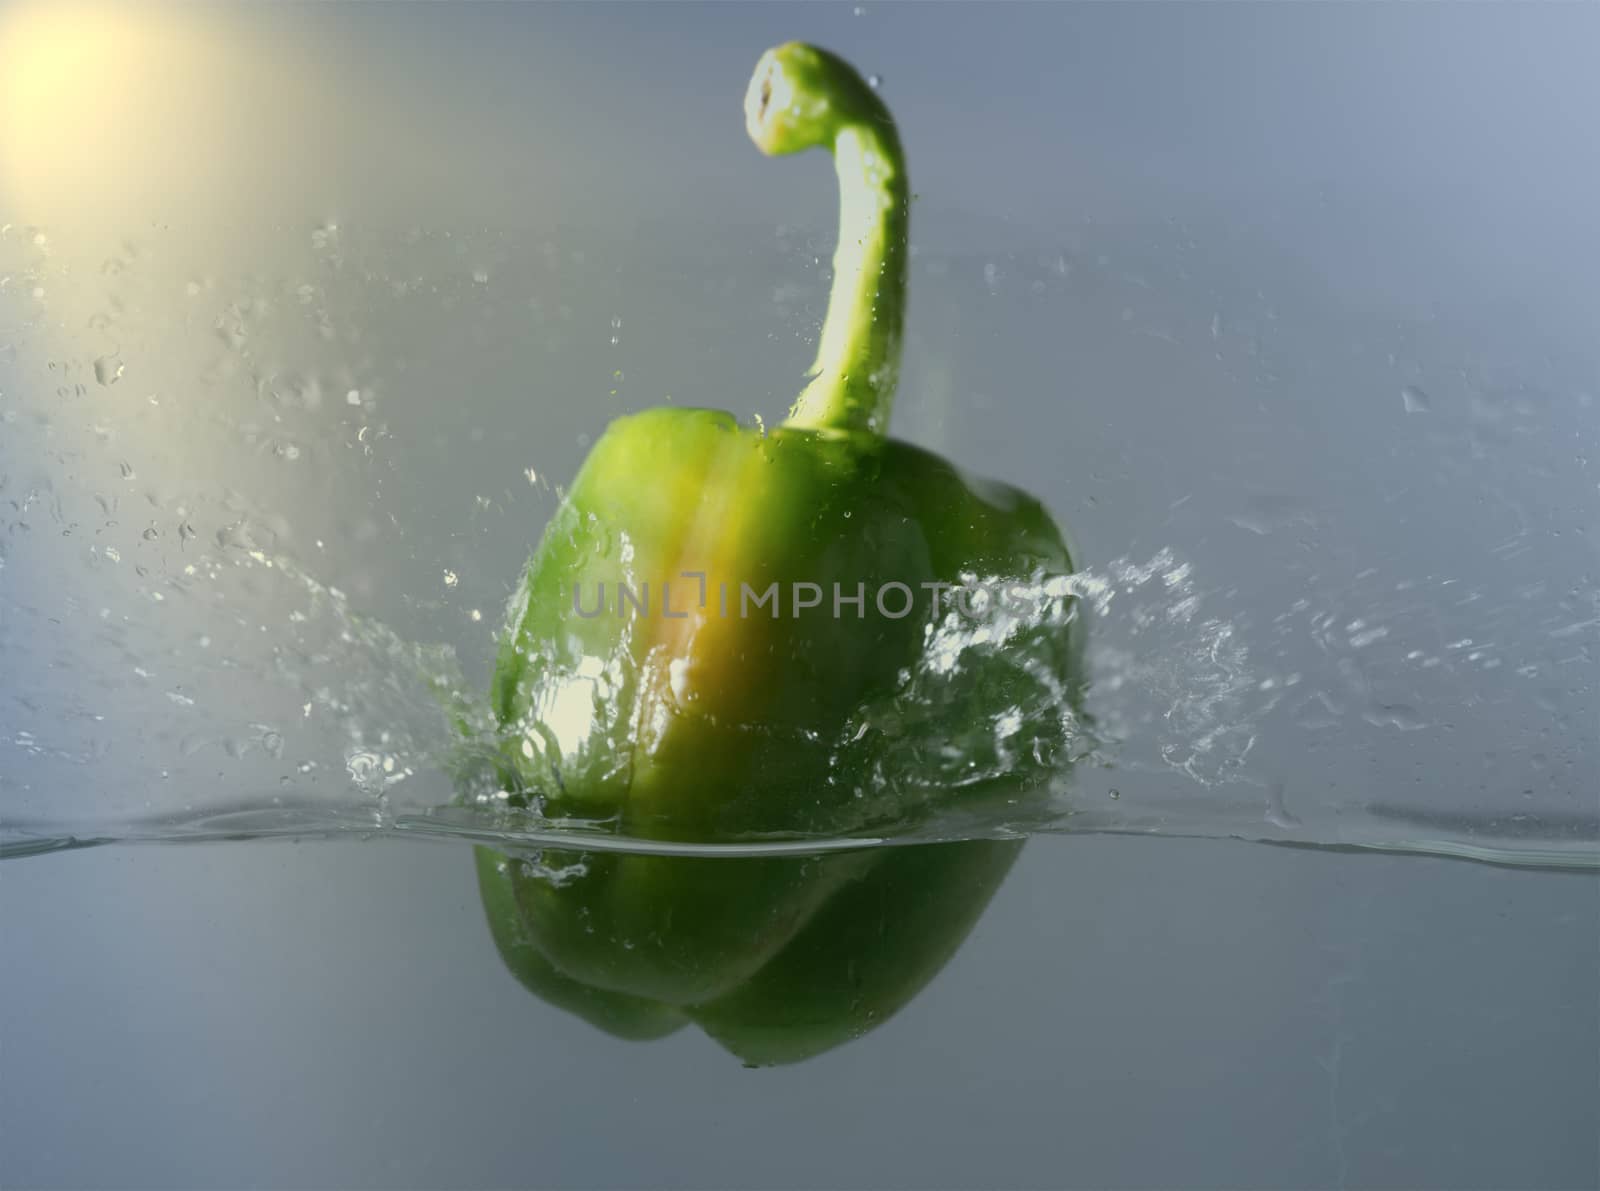 Vintage green bell peppers thrown into the water with a splash o by noppha80